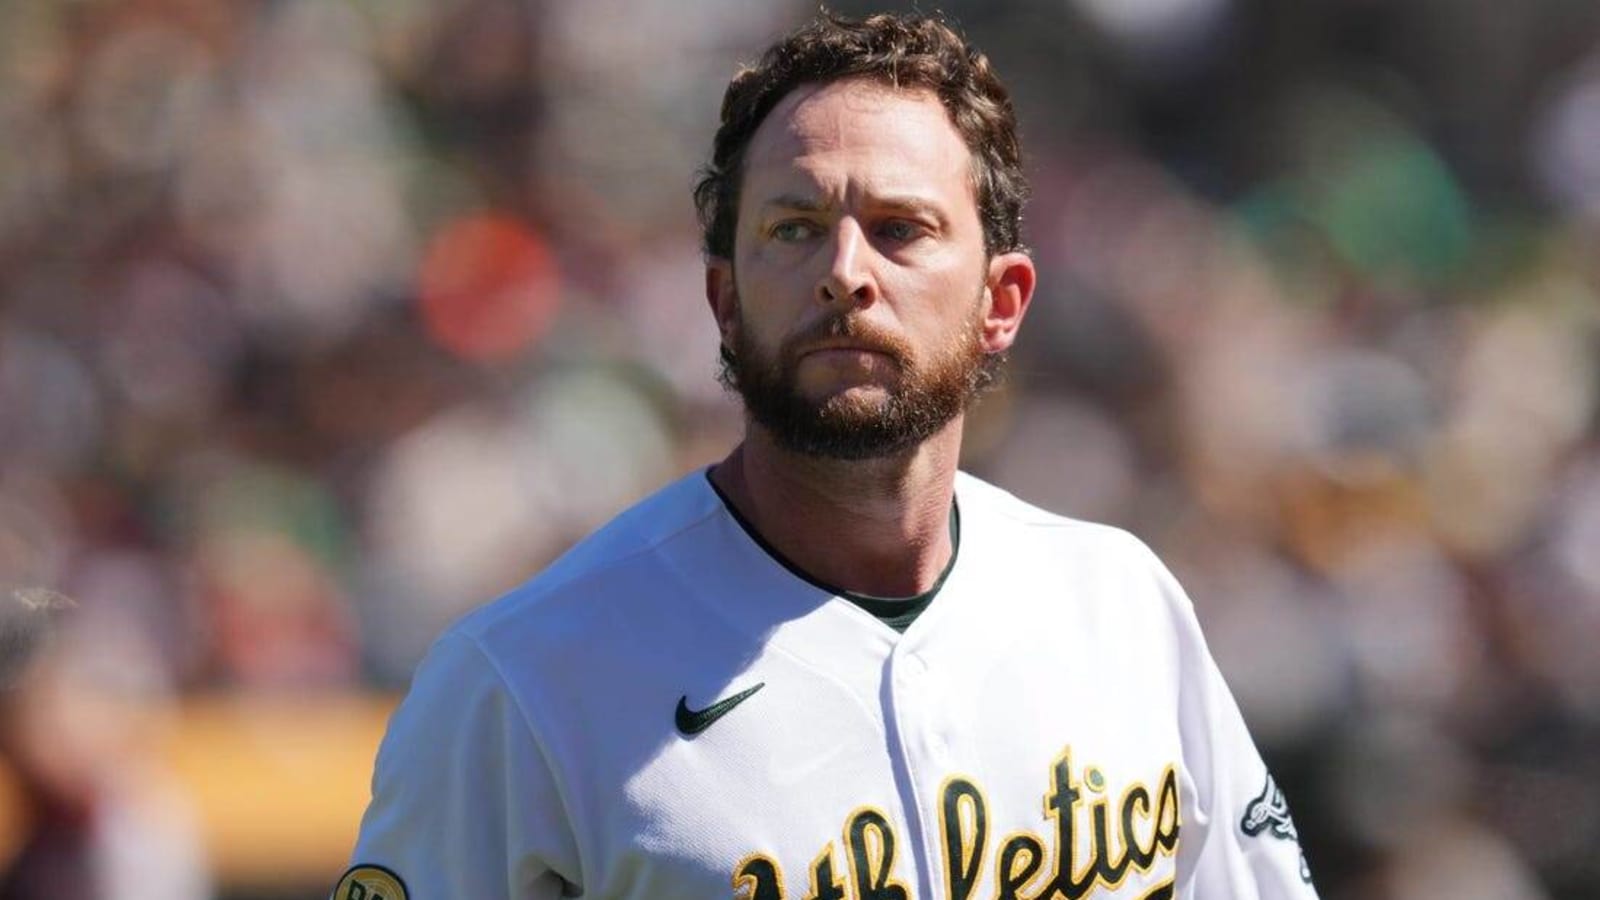 INF Jed Lowrie retires after 14 seasons